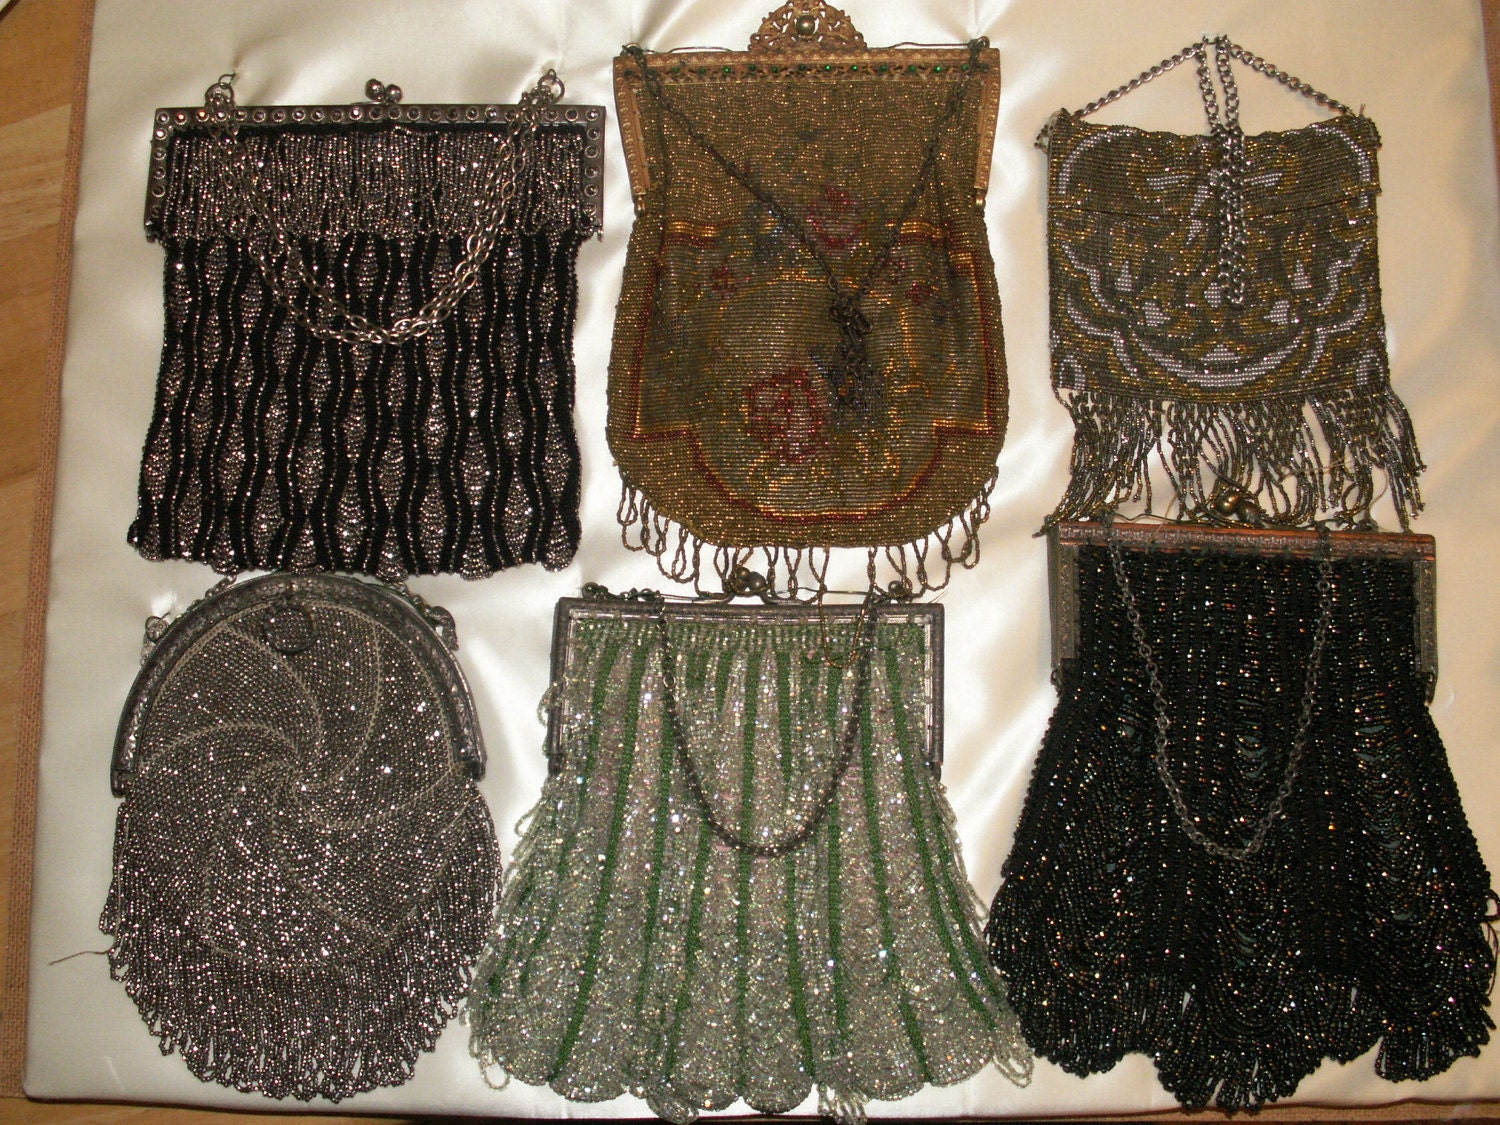 Antique Beaded Purse Collection Mounted and Framed